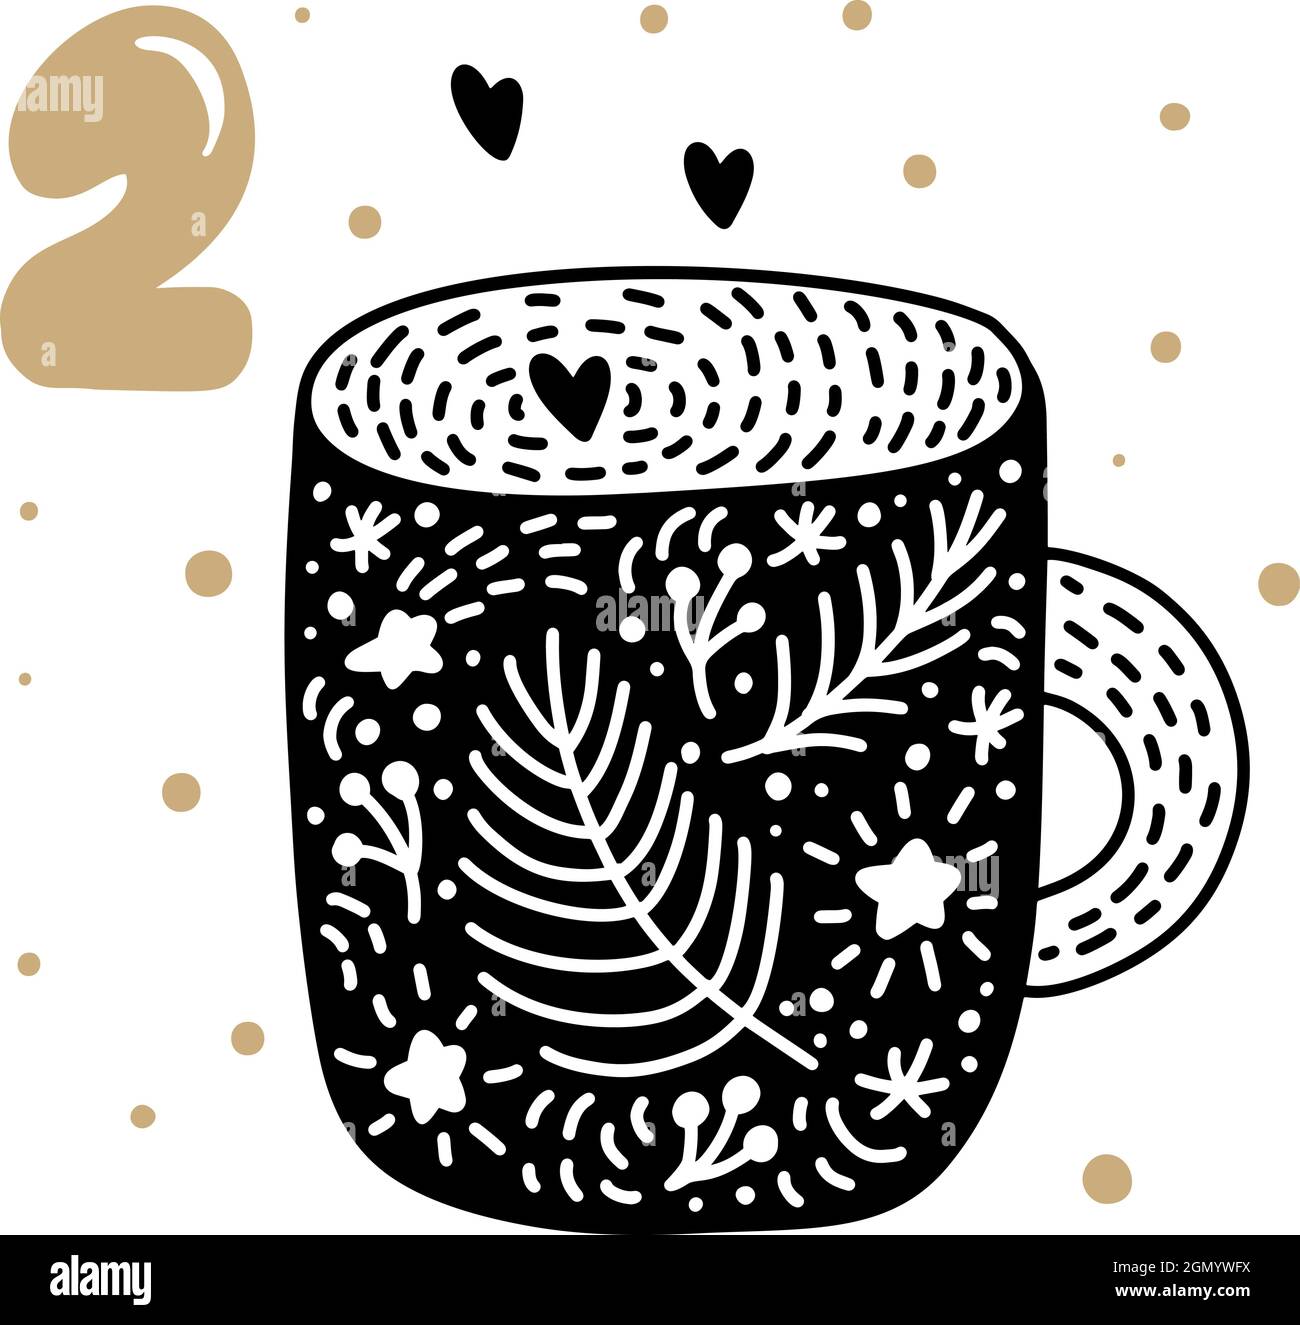 Advent calendar with cute scandinavian hand drawn vector. Twenty-four days before Christmas. Second Day. Illustration of winter cup with hearts Stock Vector